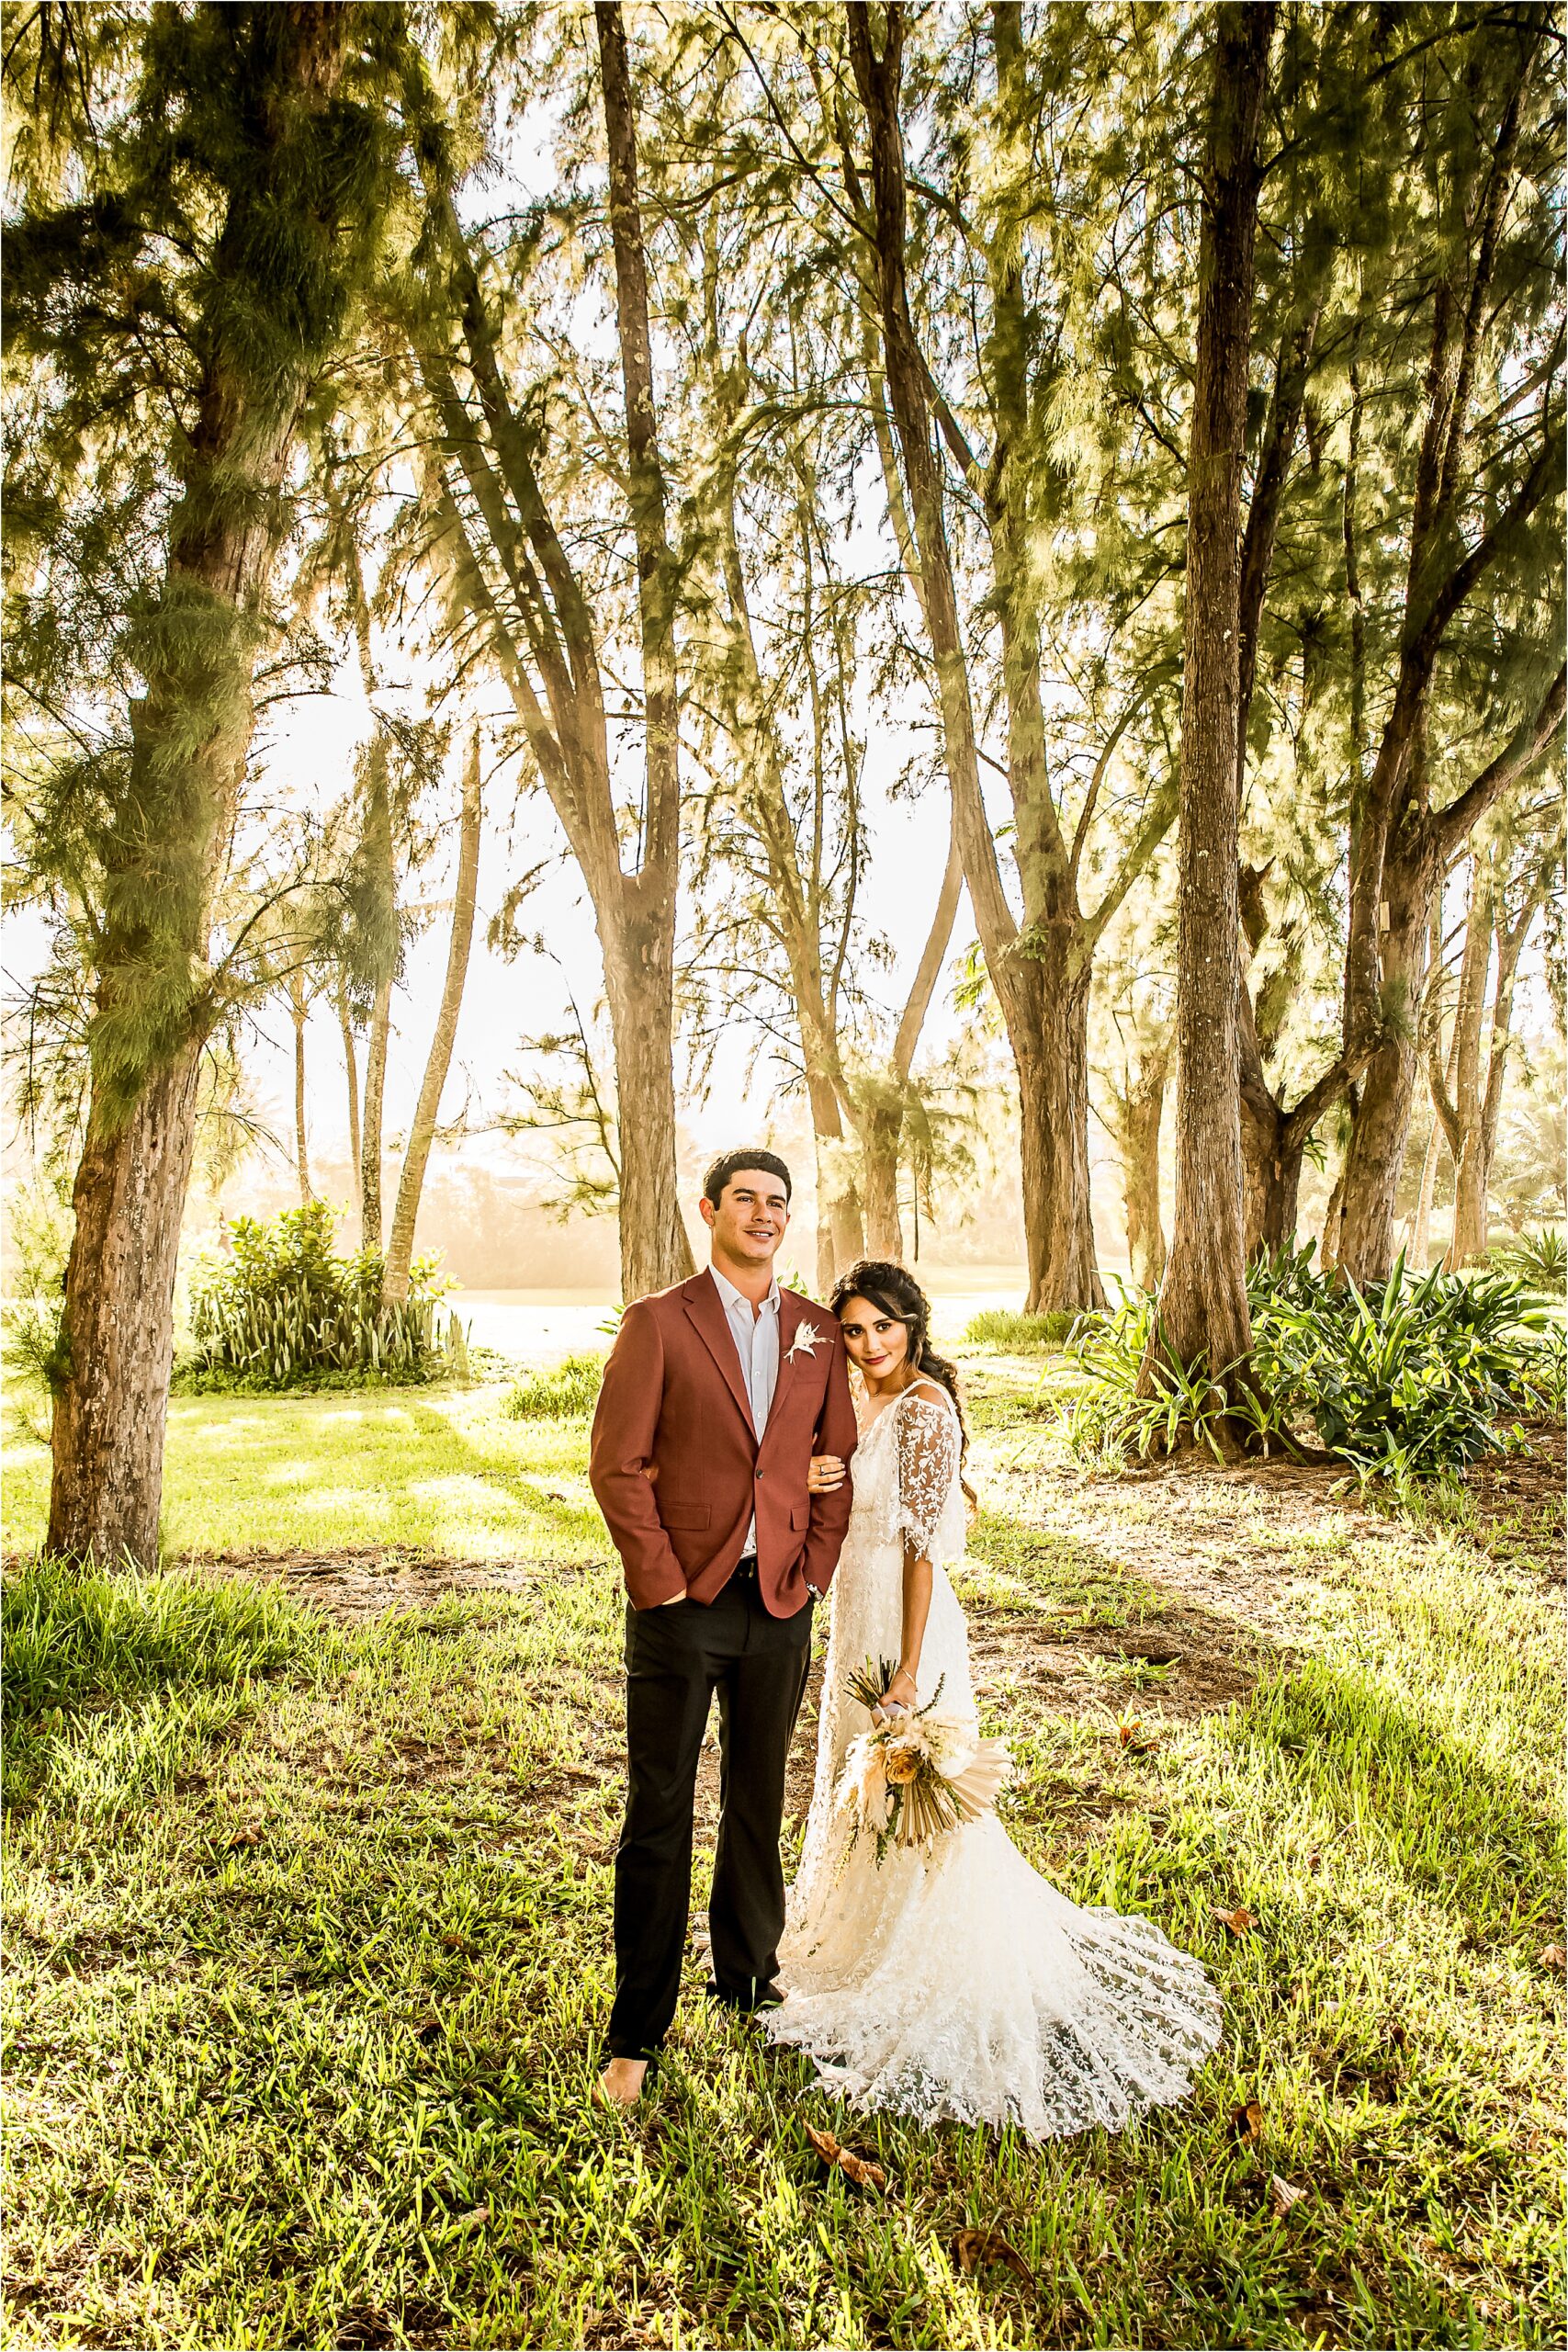 Wedding photography of man and woman forehead to forehead in wedding attire with trees in the background